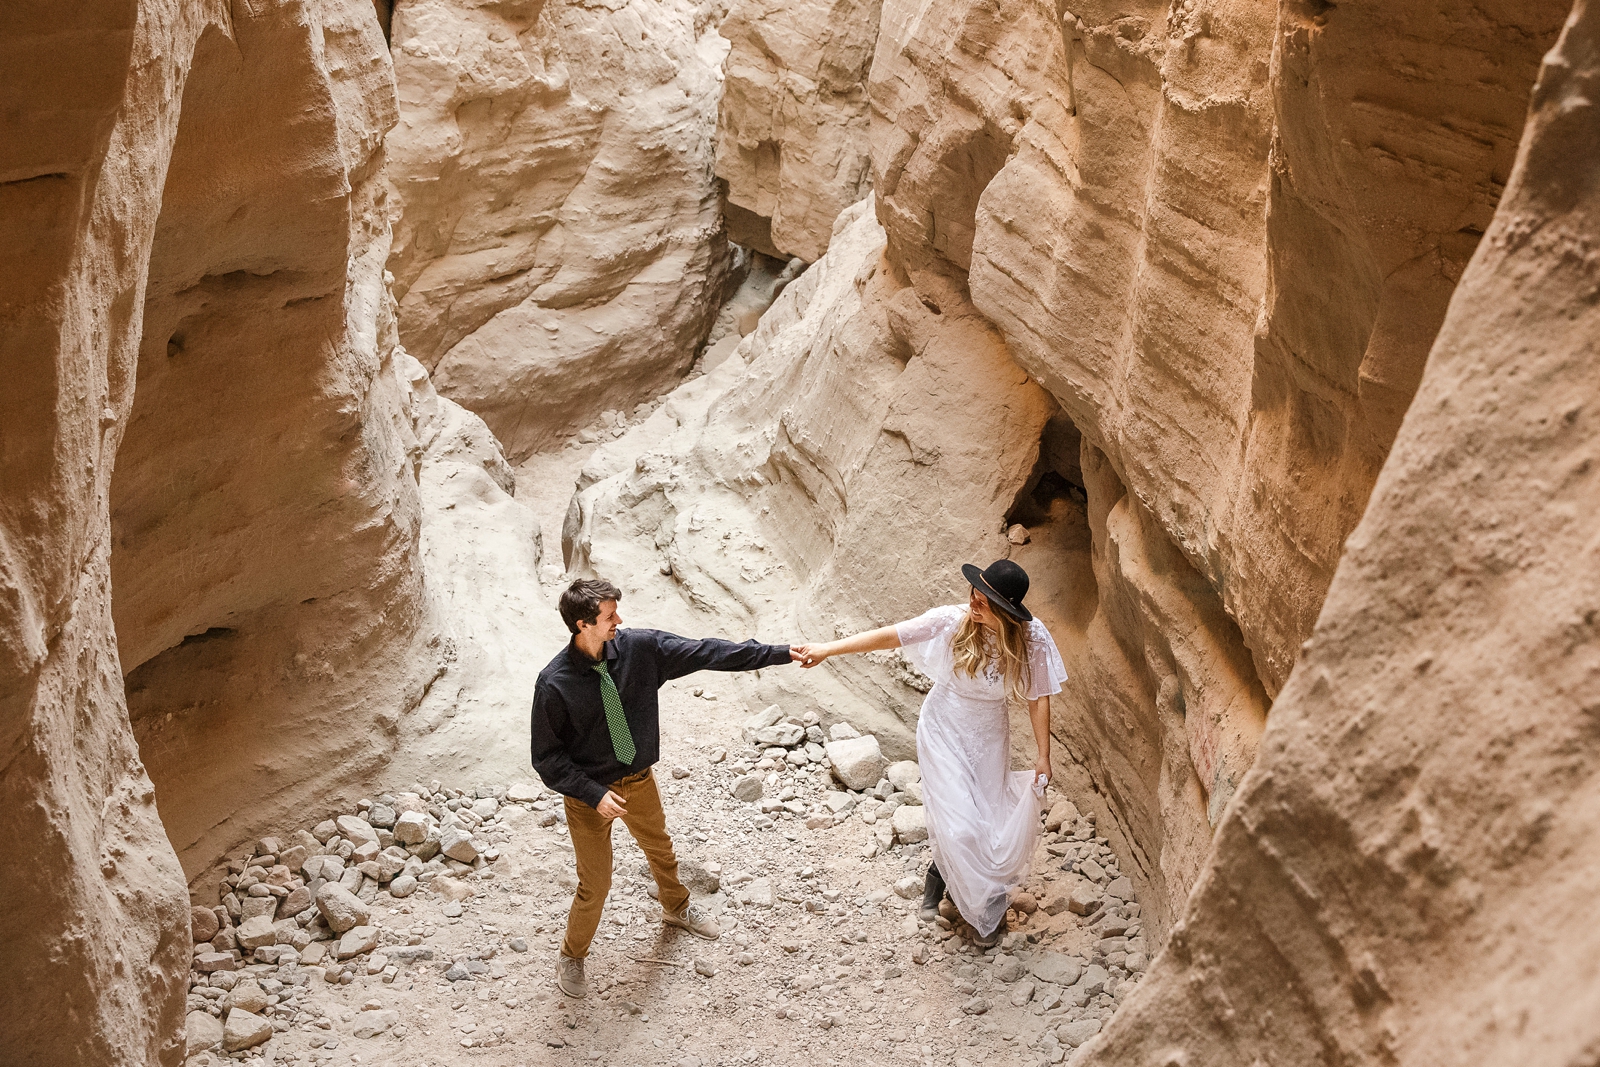 At this California slot canyon elopement, this bride and groom squeezed through narrow sandstone canyons and used ropes to climb the canyon.